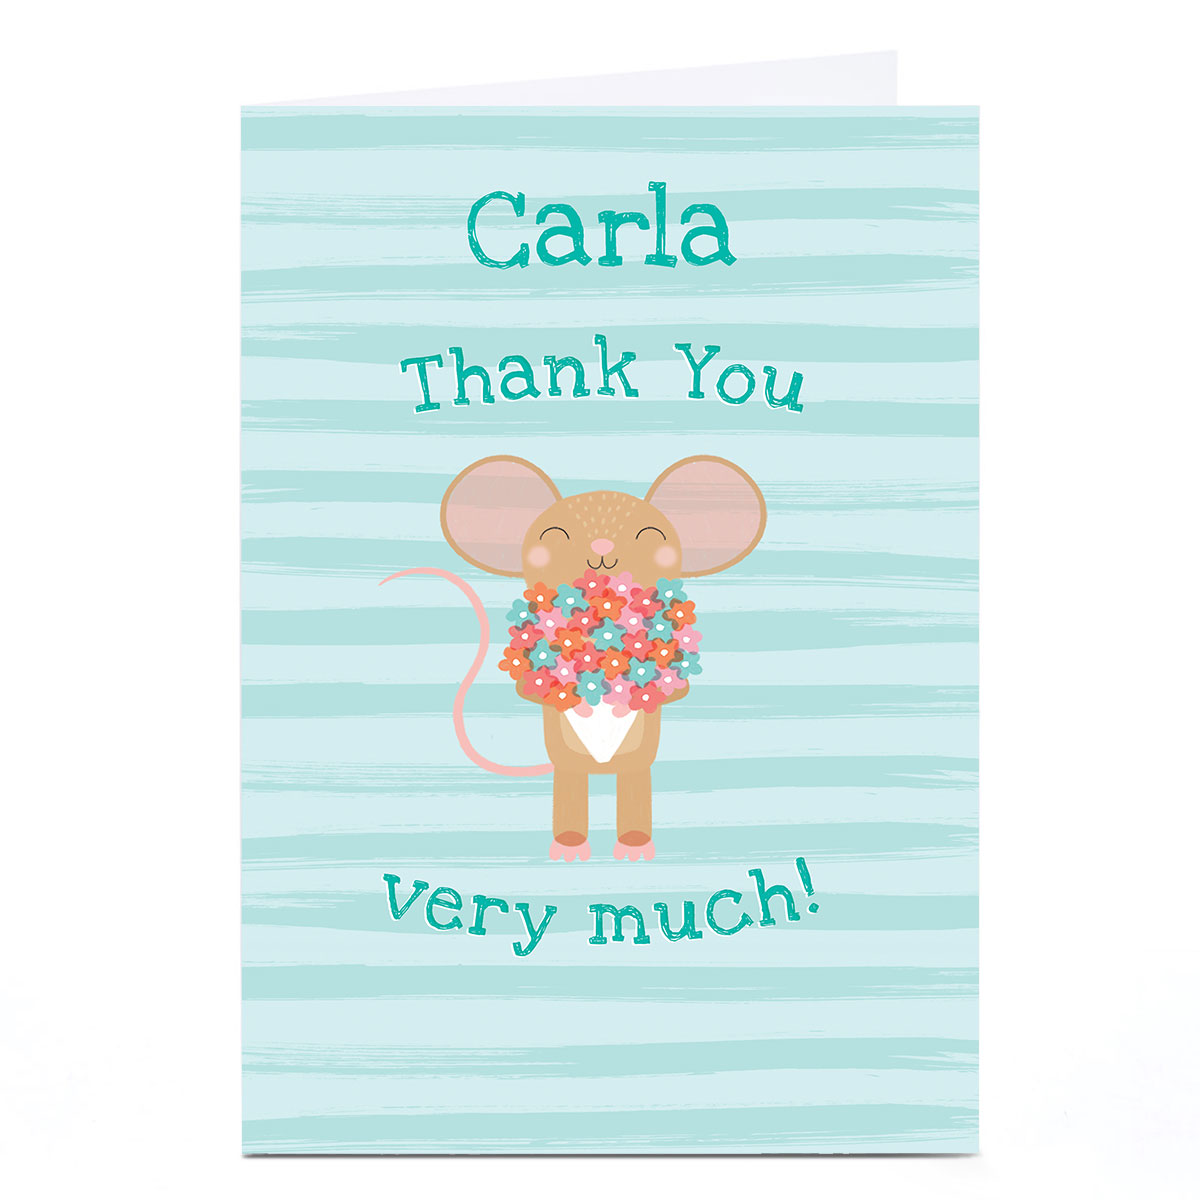 Personalised Hannah Steele Thank You Card - Mouse